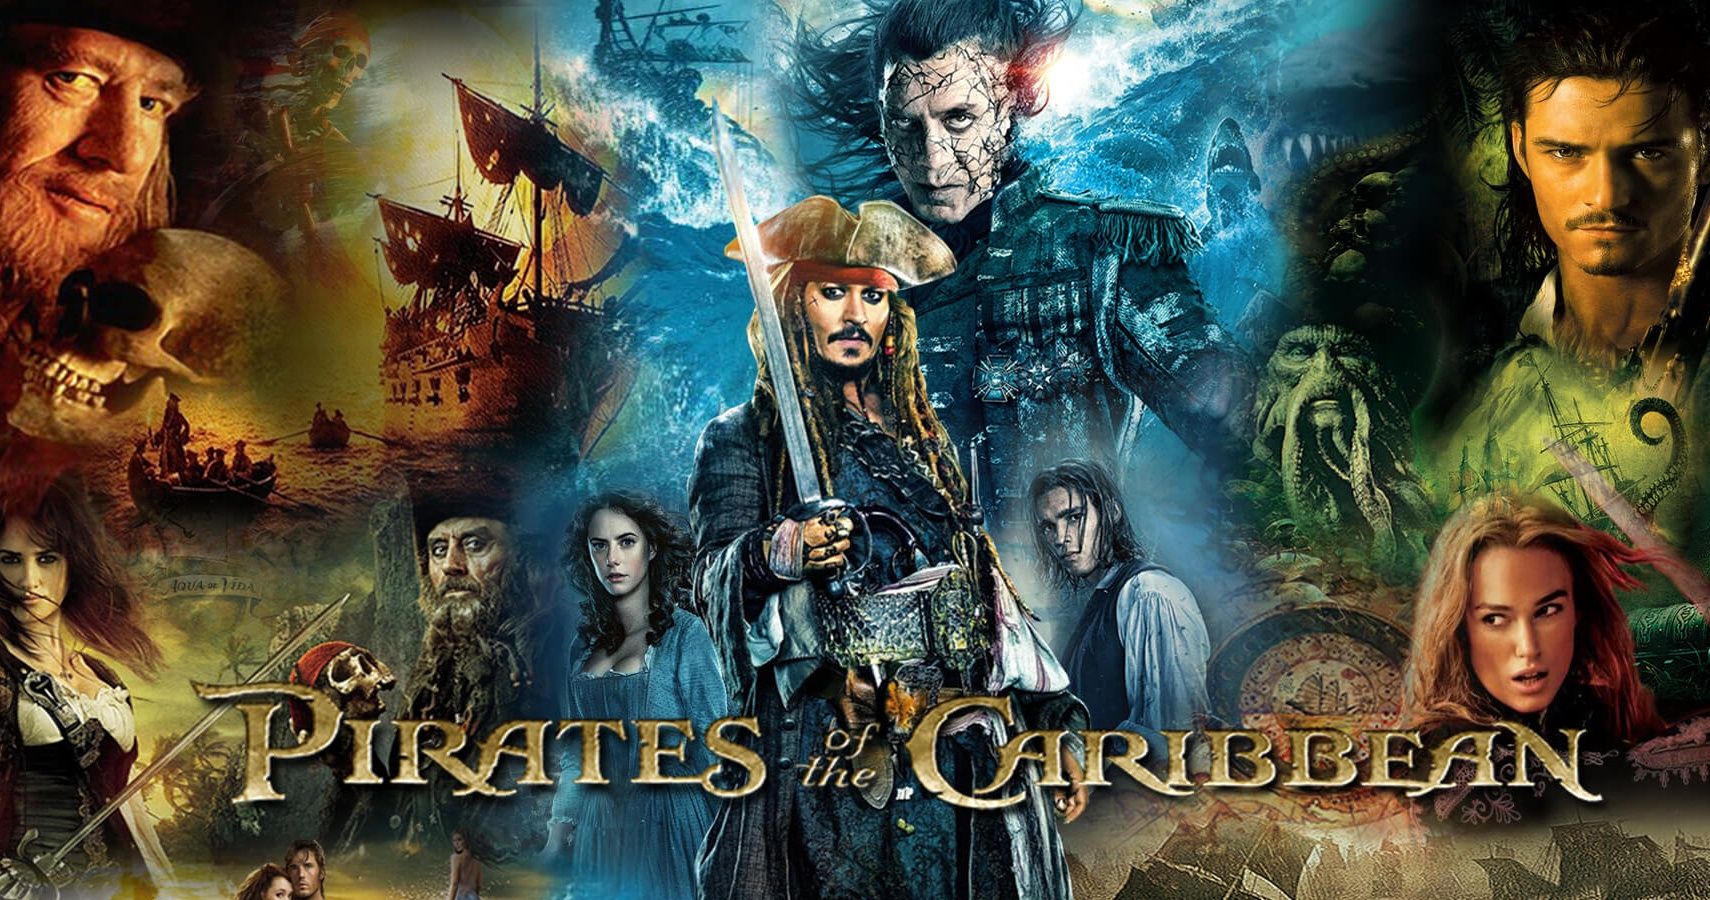 Featured Pirates of the Caribbean